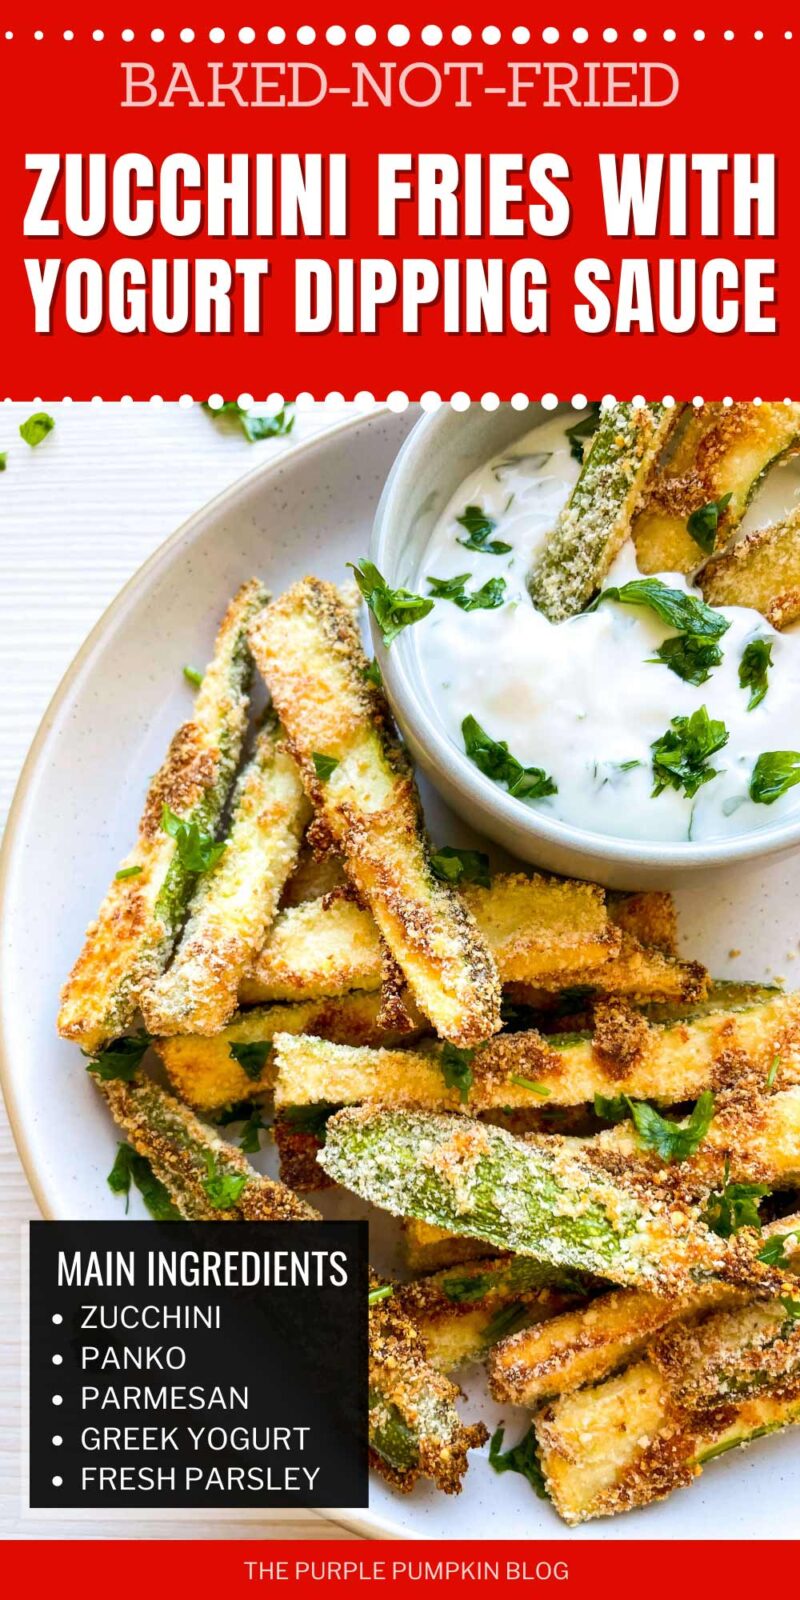 Baked-not-Fried Zucchini Fries with Yogurt Dipping Sauce